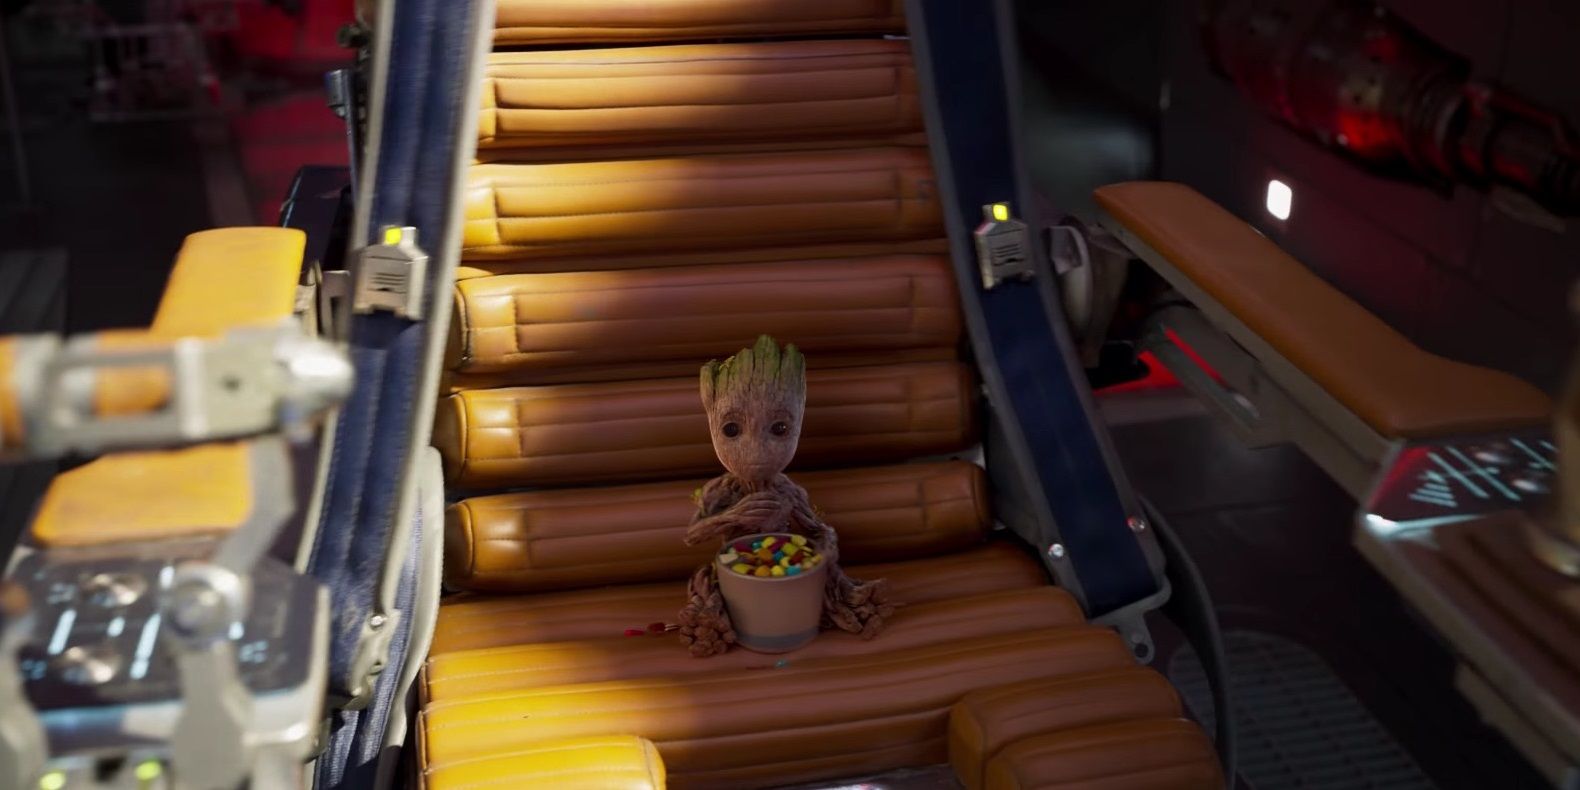 Baby Groot sits on a seat